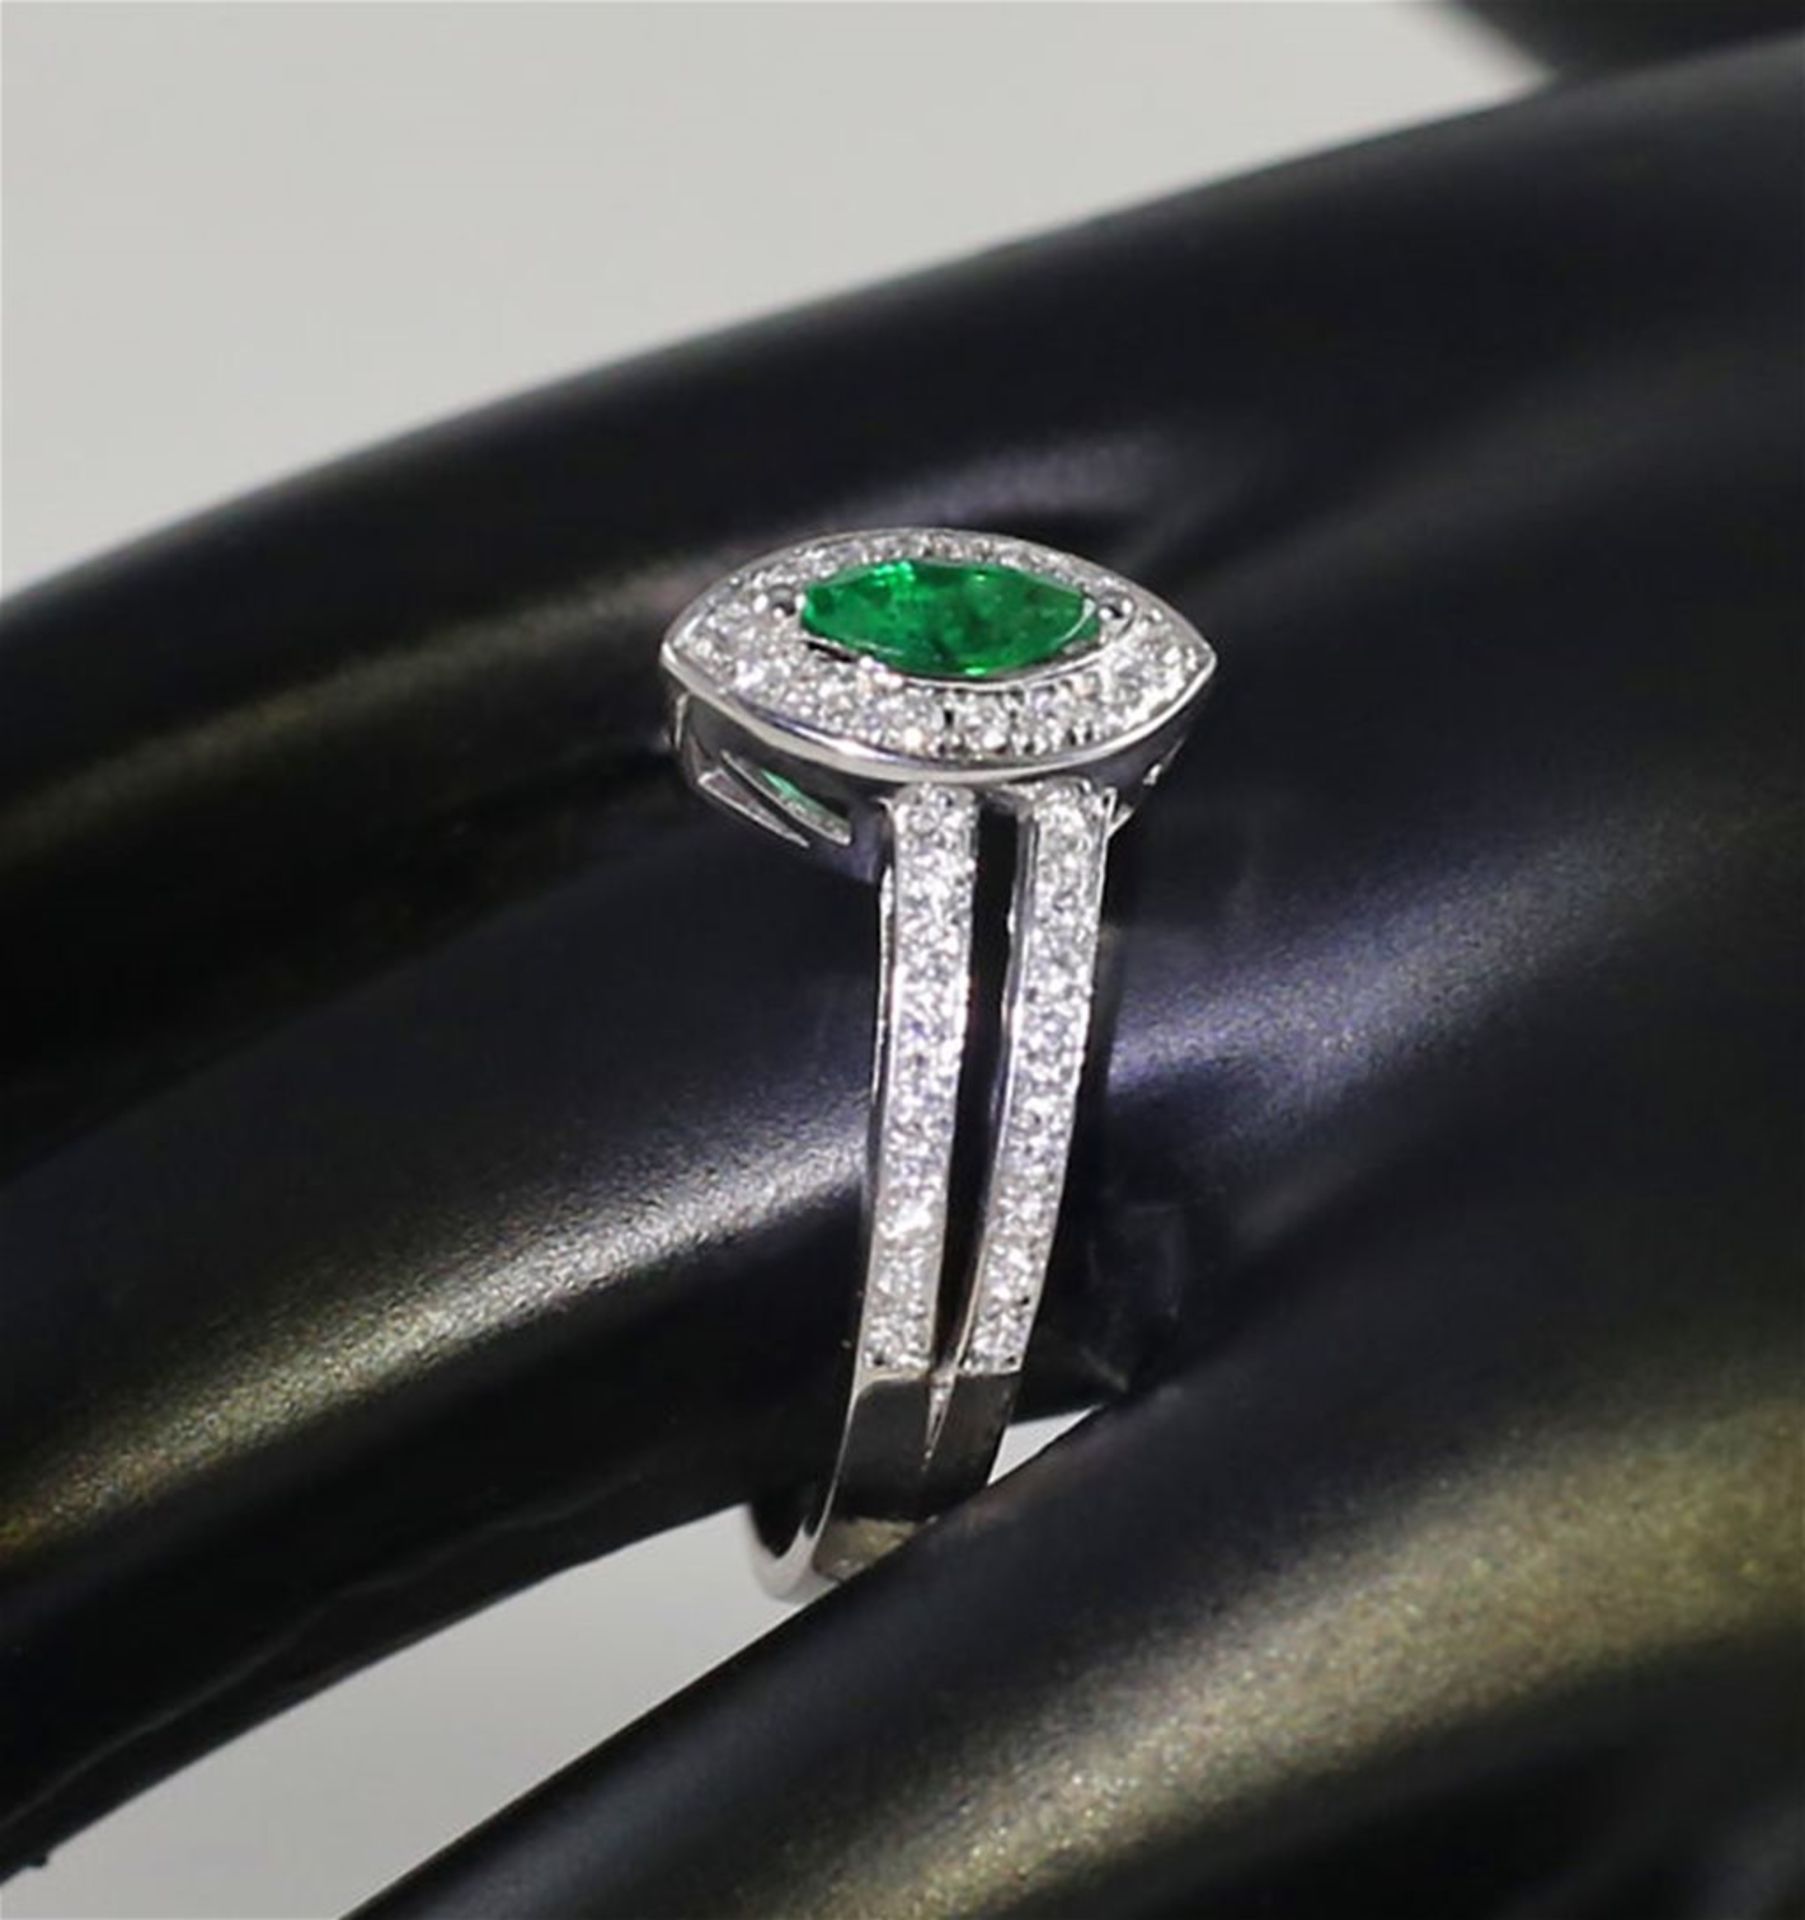 18 K / 750 White Gold Emerald and Diamond Ring - Image 4 of 6